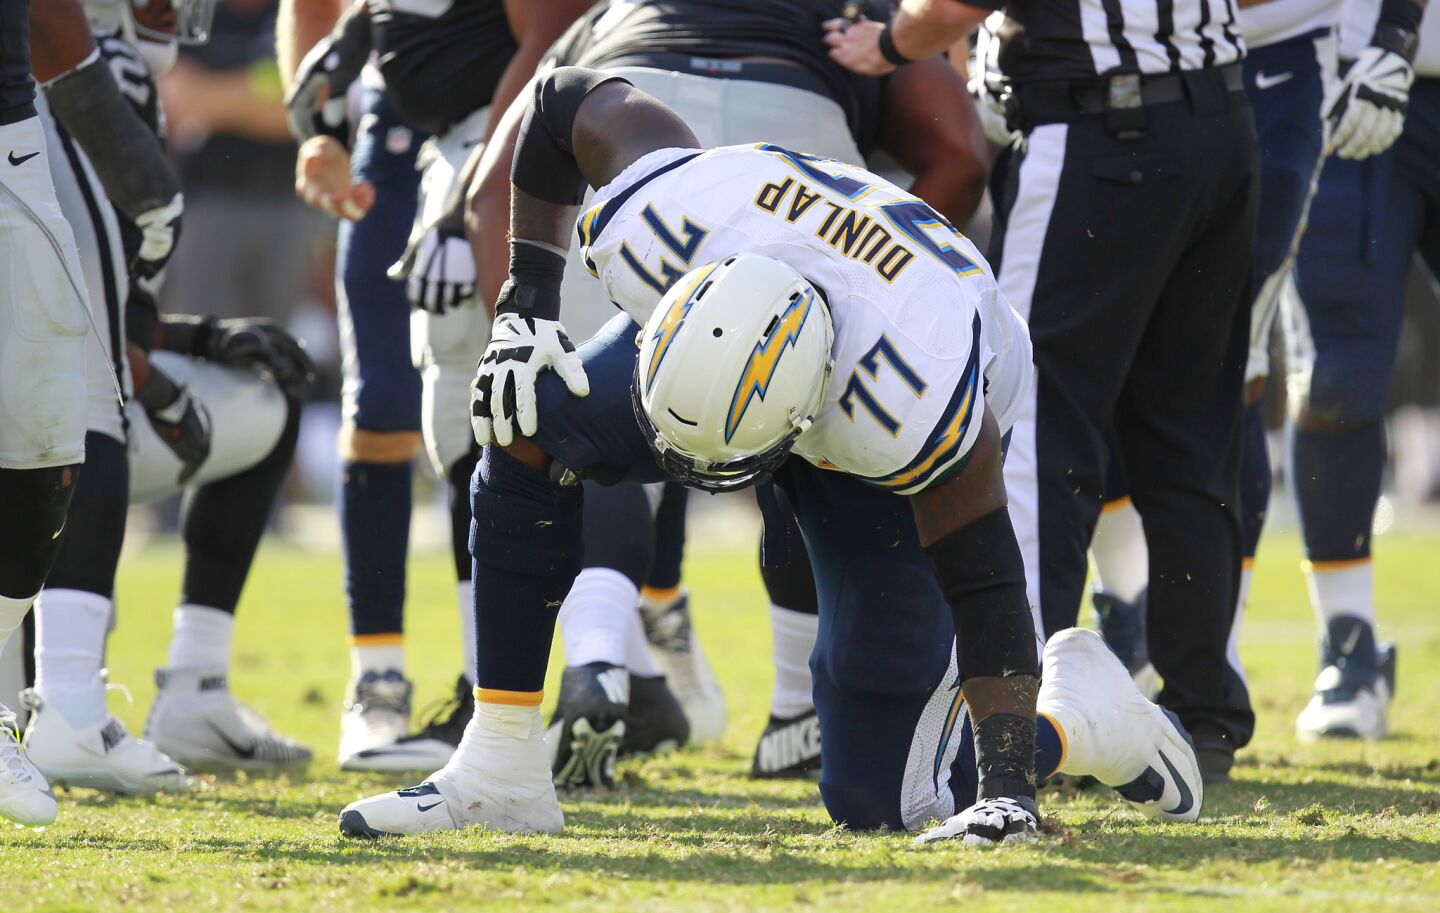 San Diego Chargers King Dunlap was slow to get up in the 4th quarter against the Raiders in Oakland on Oct. 9, 2016. (Photo by K.C. Alfred/The San Diego Union-Tribune)